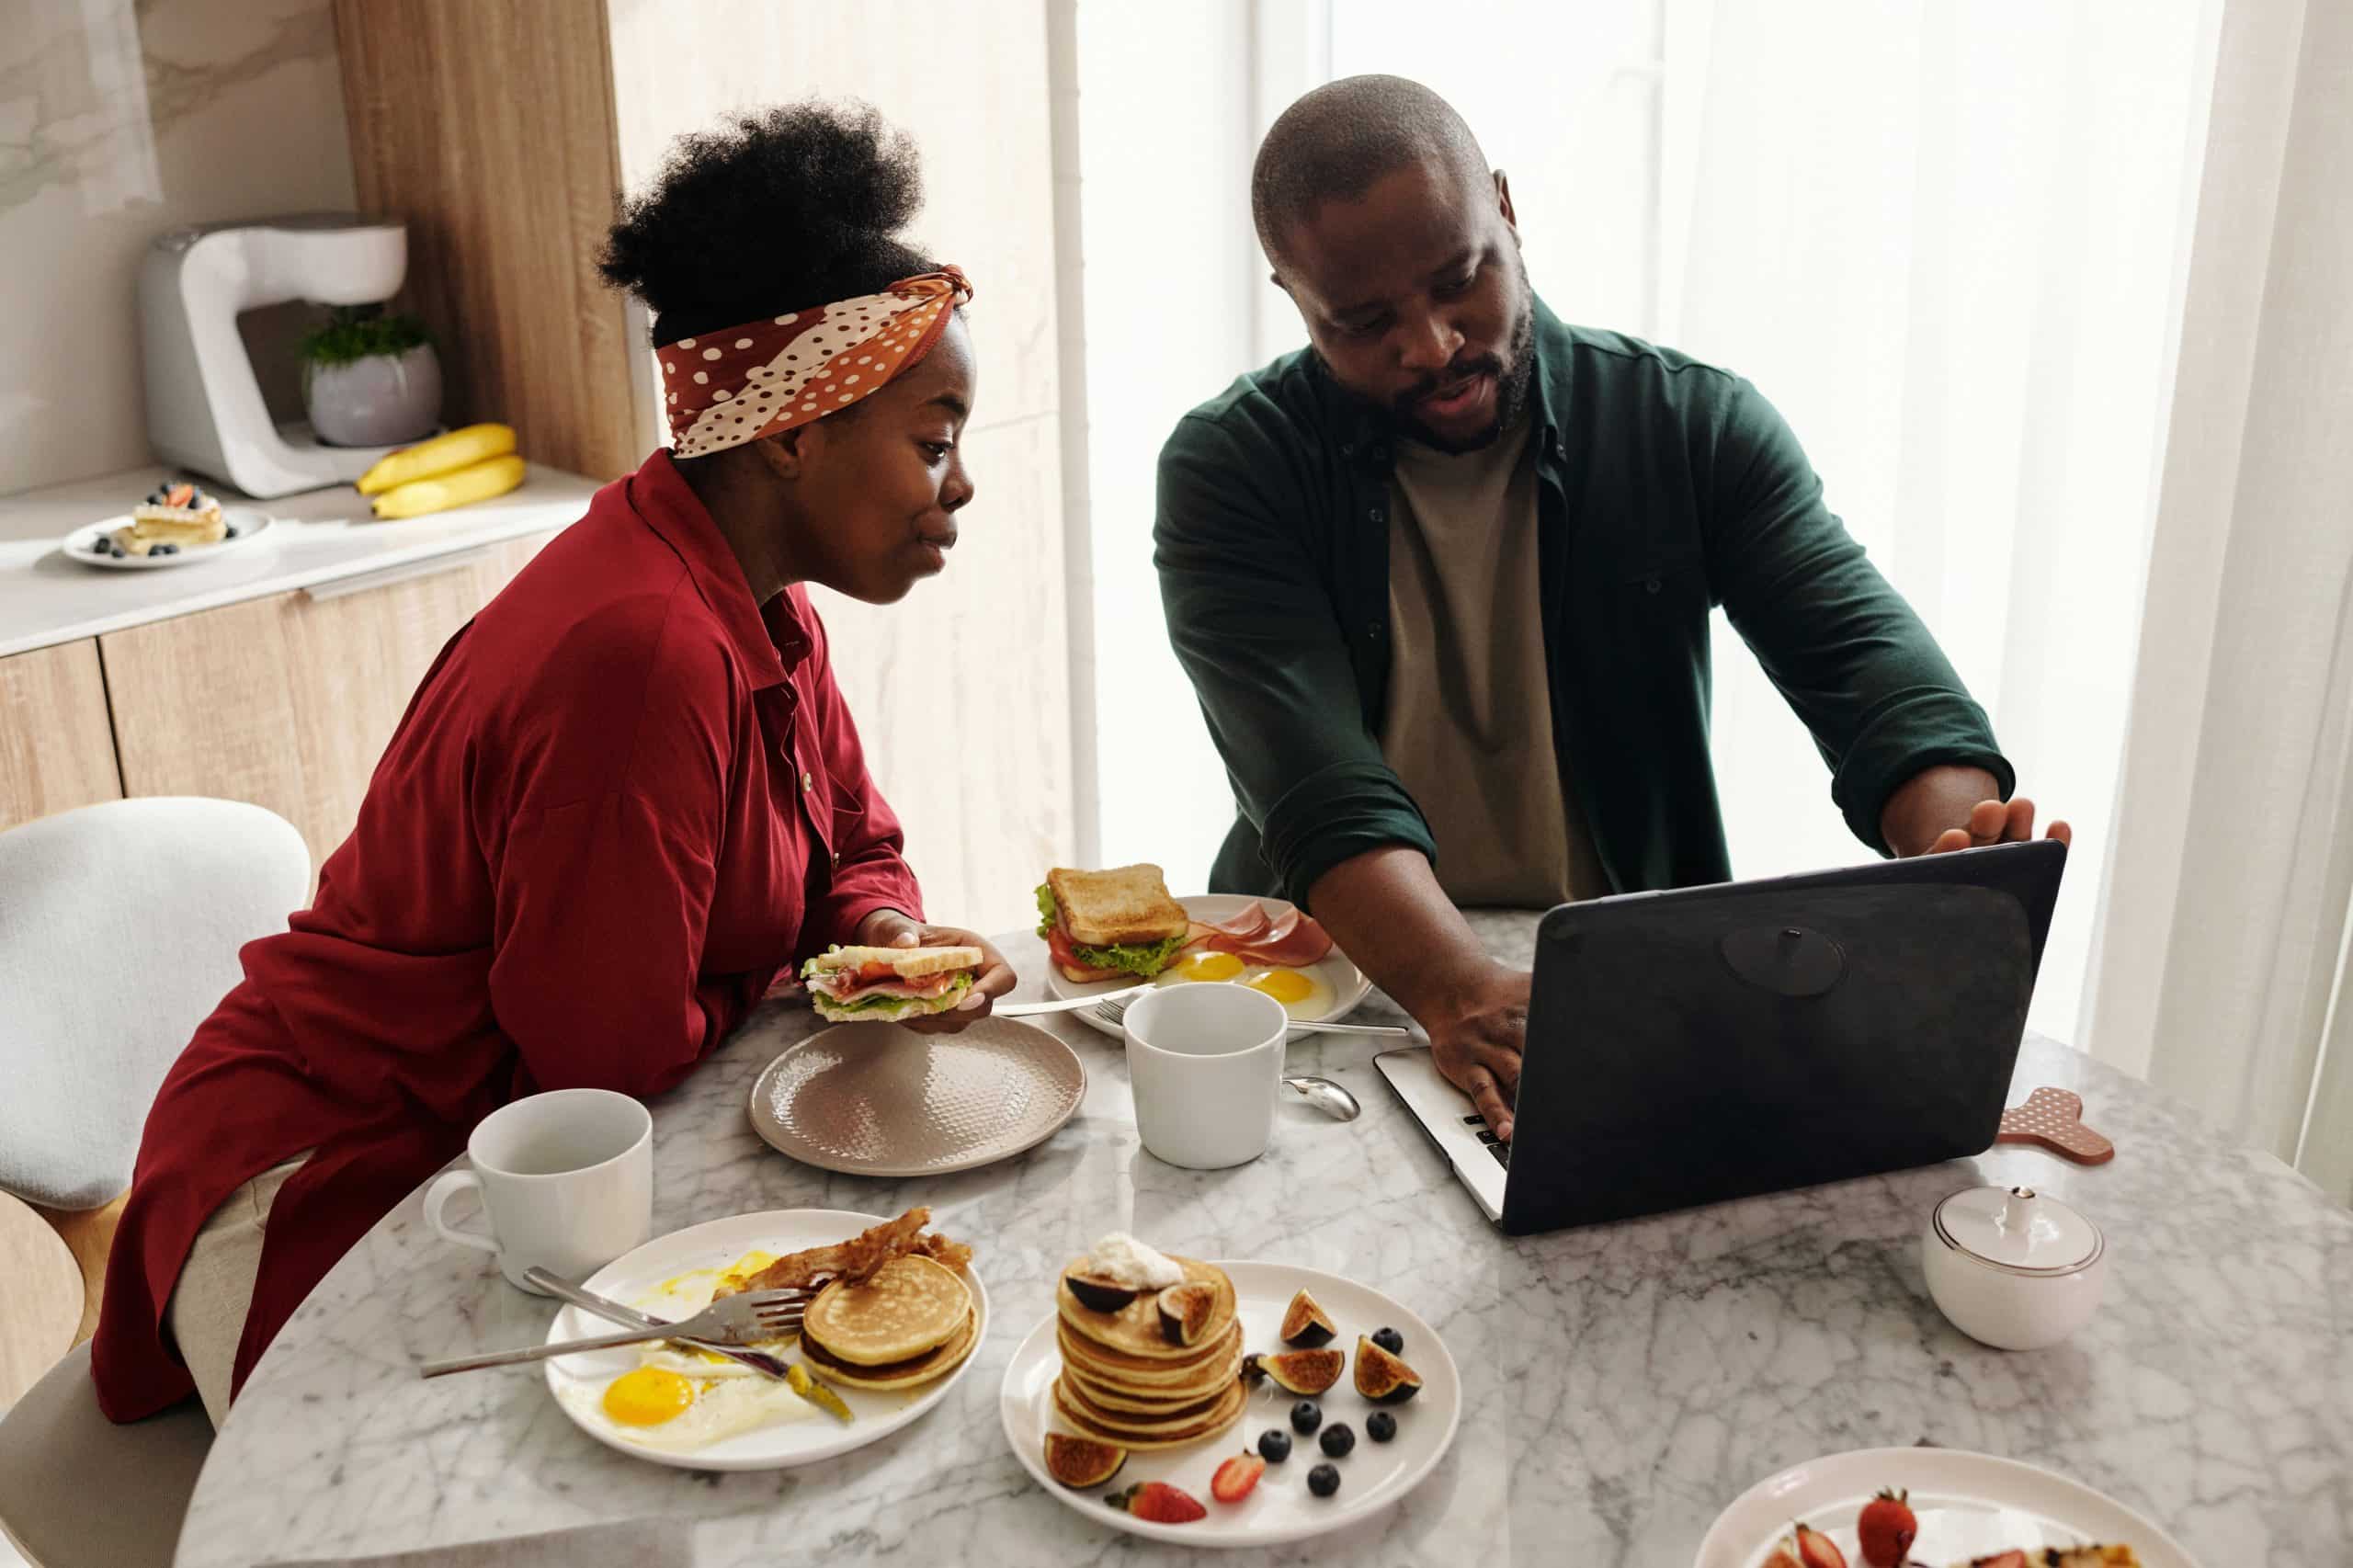 Man and Woman Looking at the Laptop While in Breakfast